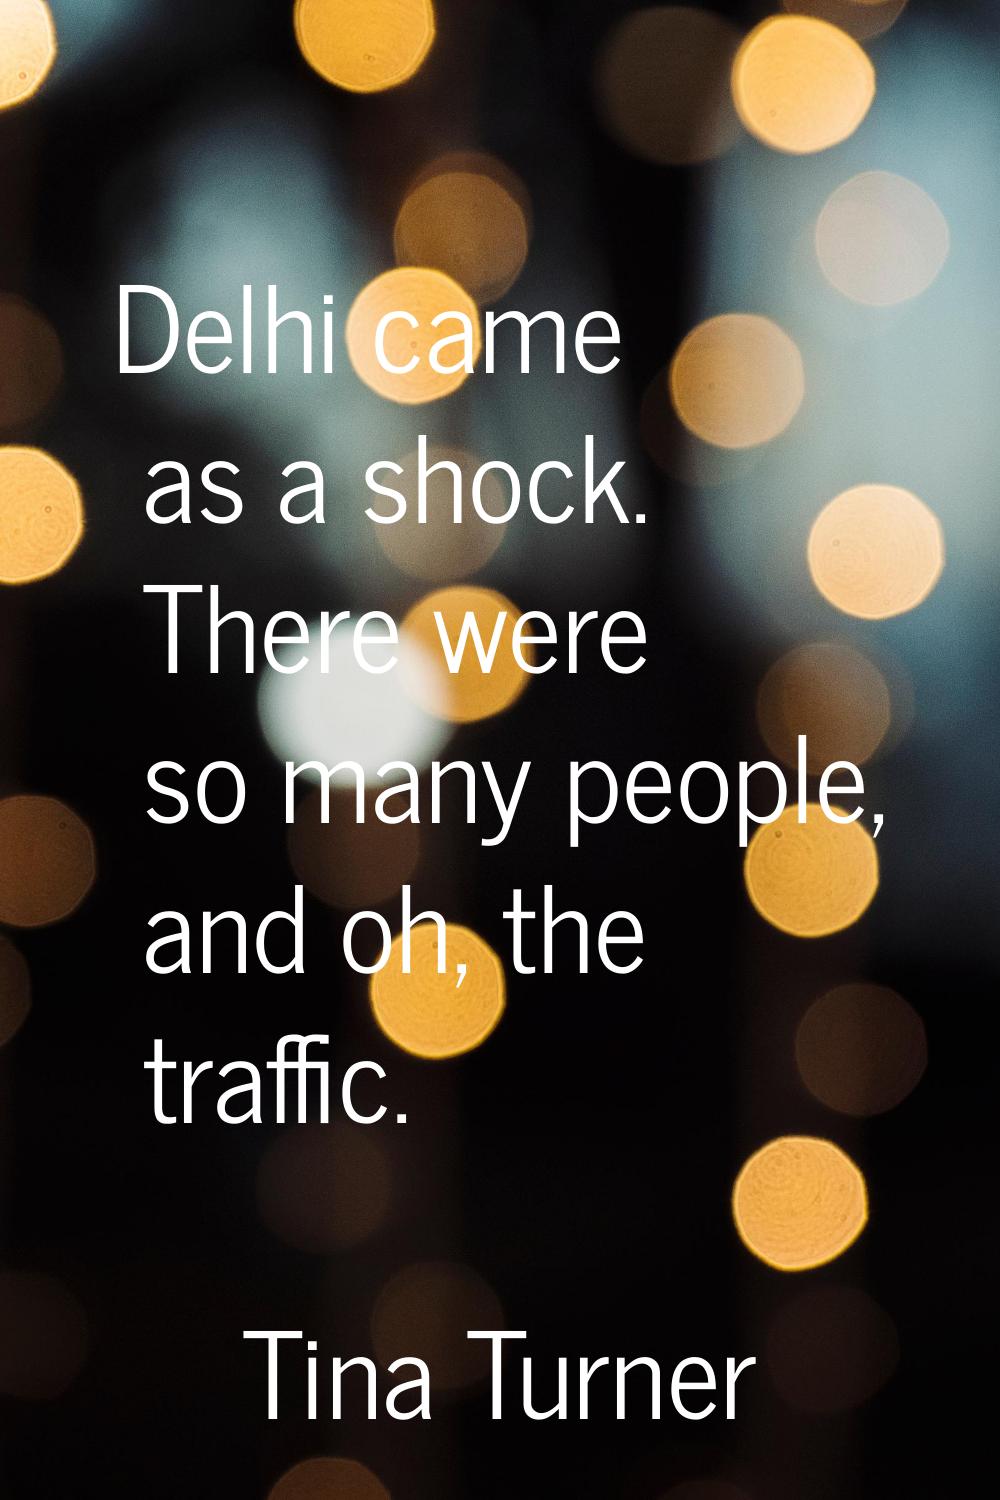 Delhi came as a shock. There were so many people, and oh, the traffic.